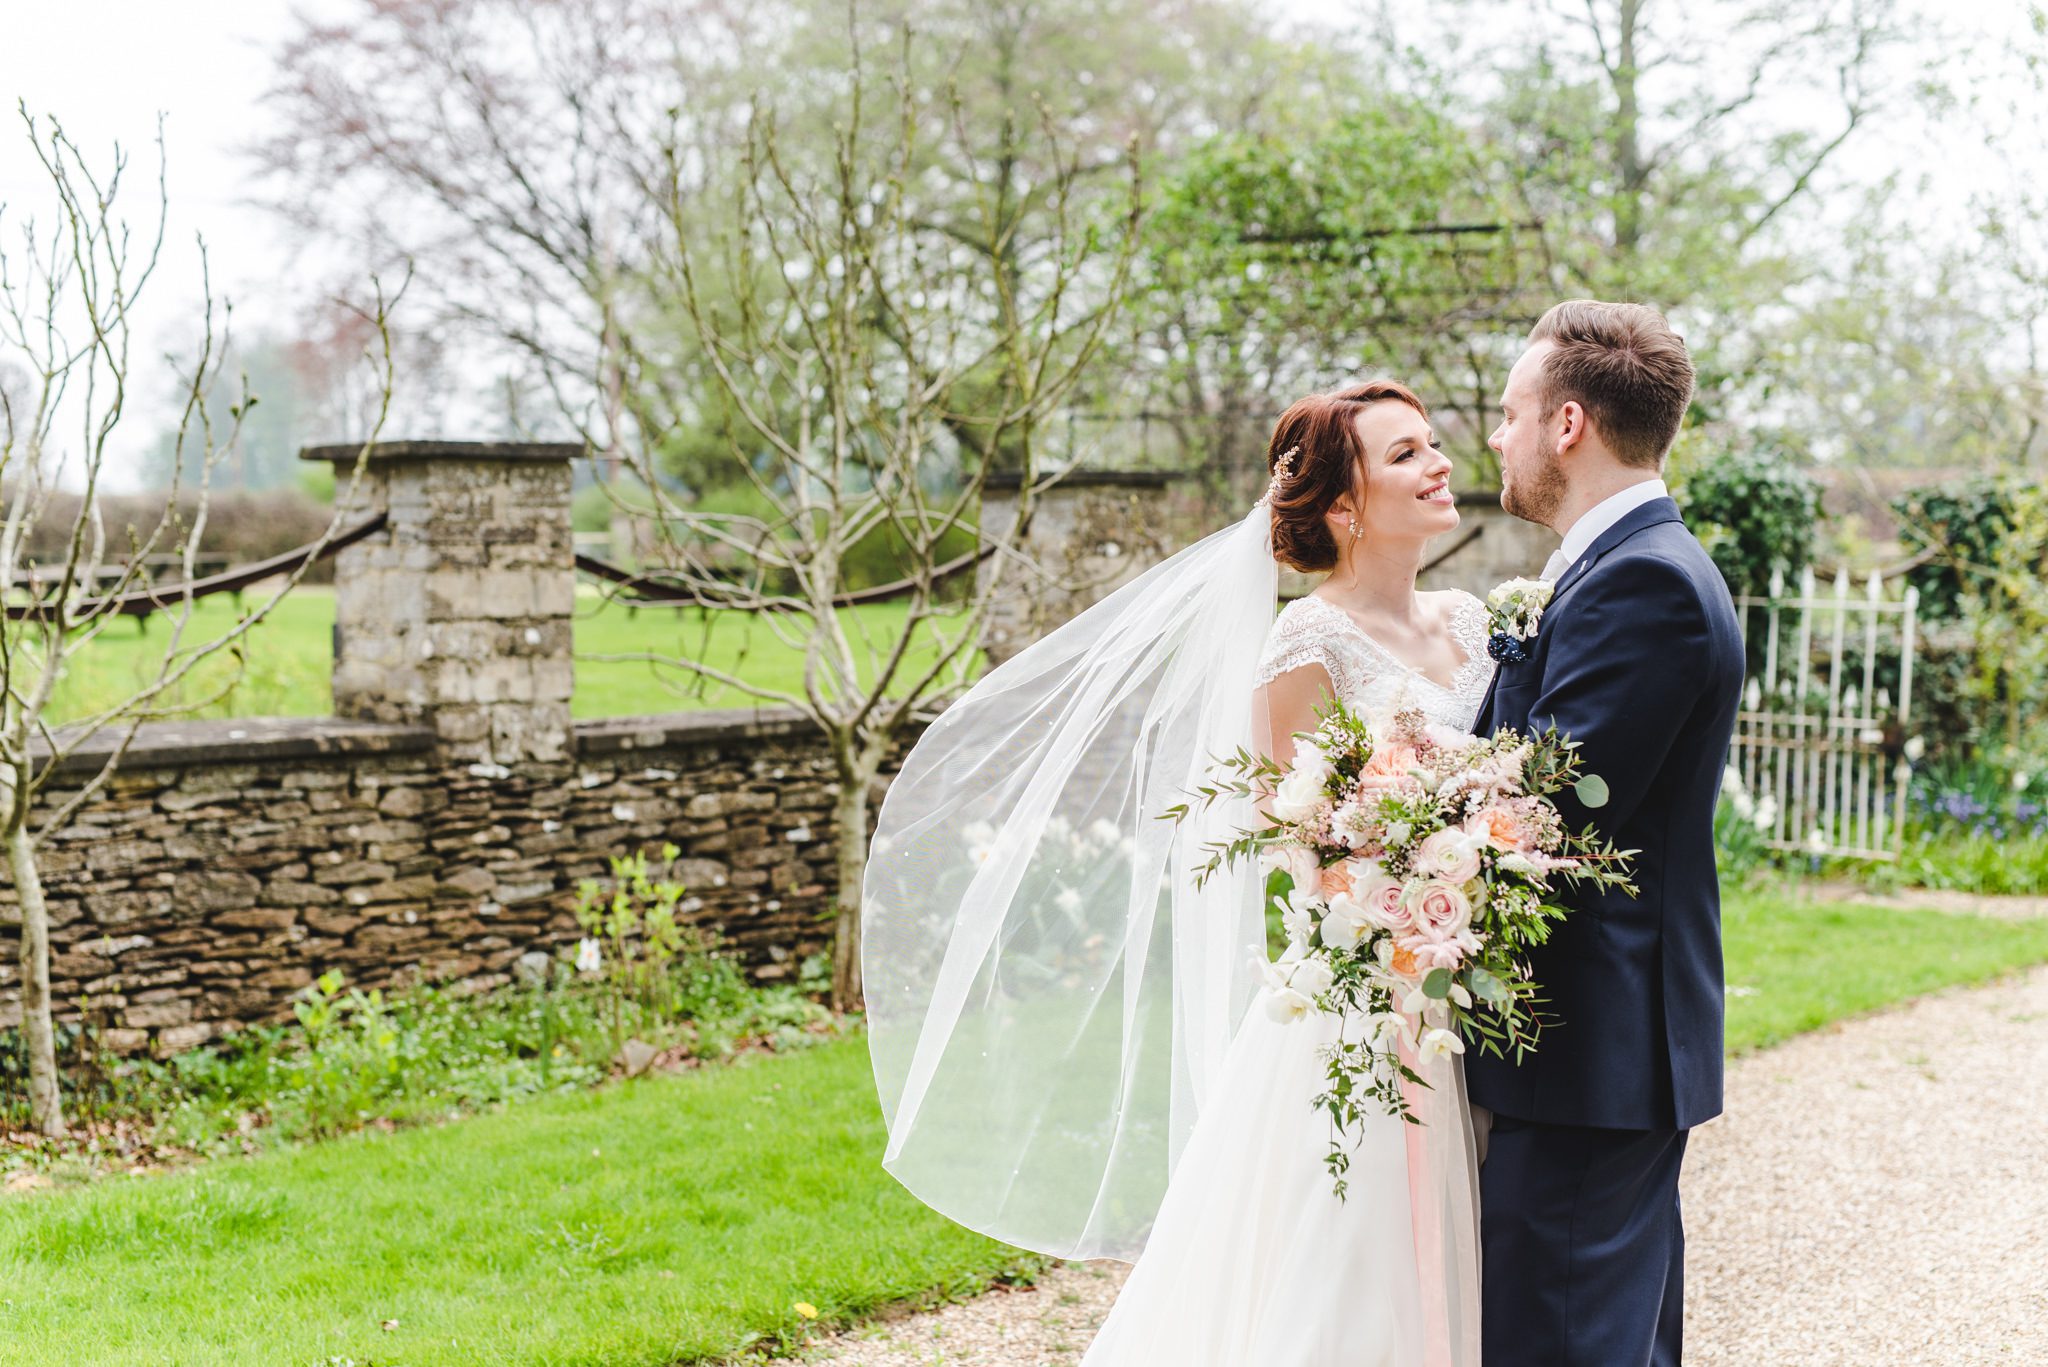 Gloucestershire wedding photography at the Great Tythe Barn in the gardens